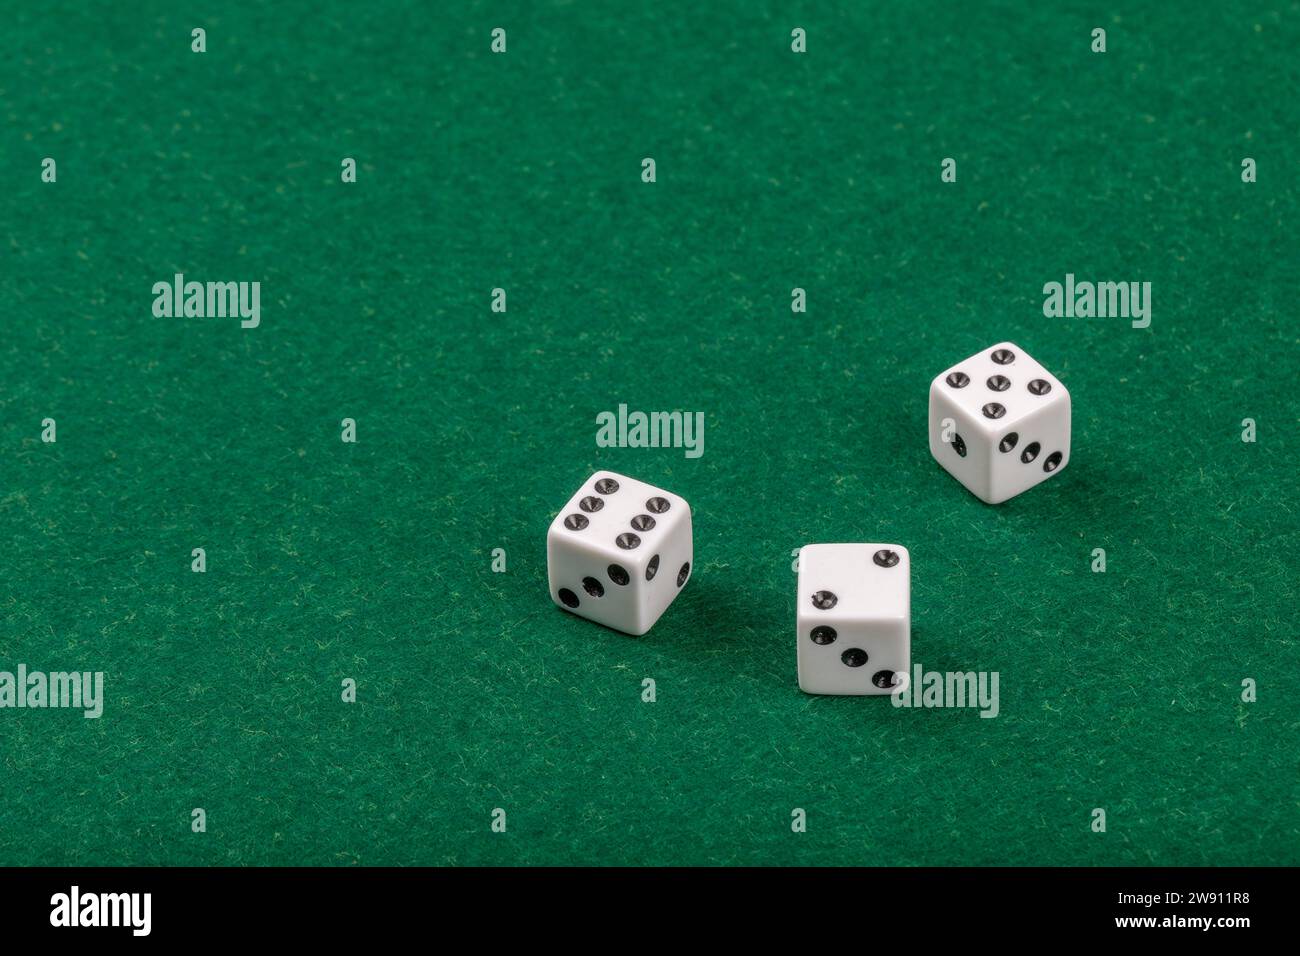 Three White Dice on Green Velvet Casino Table for Gaming and Gambling Stock Photo